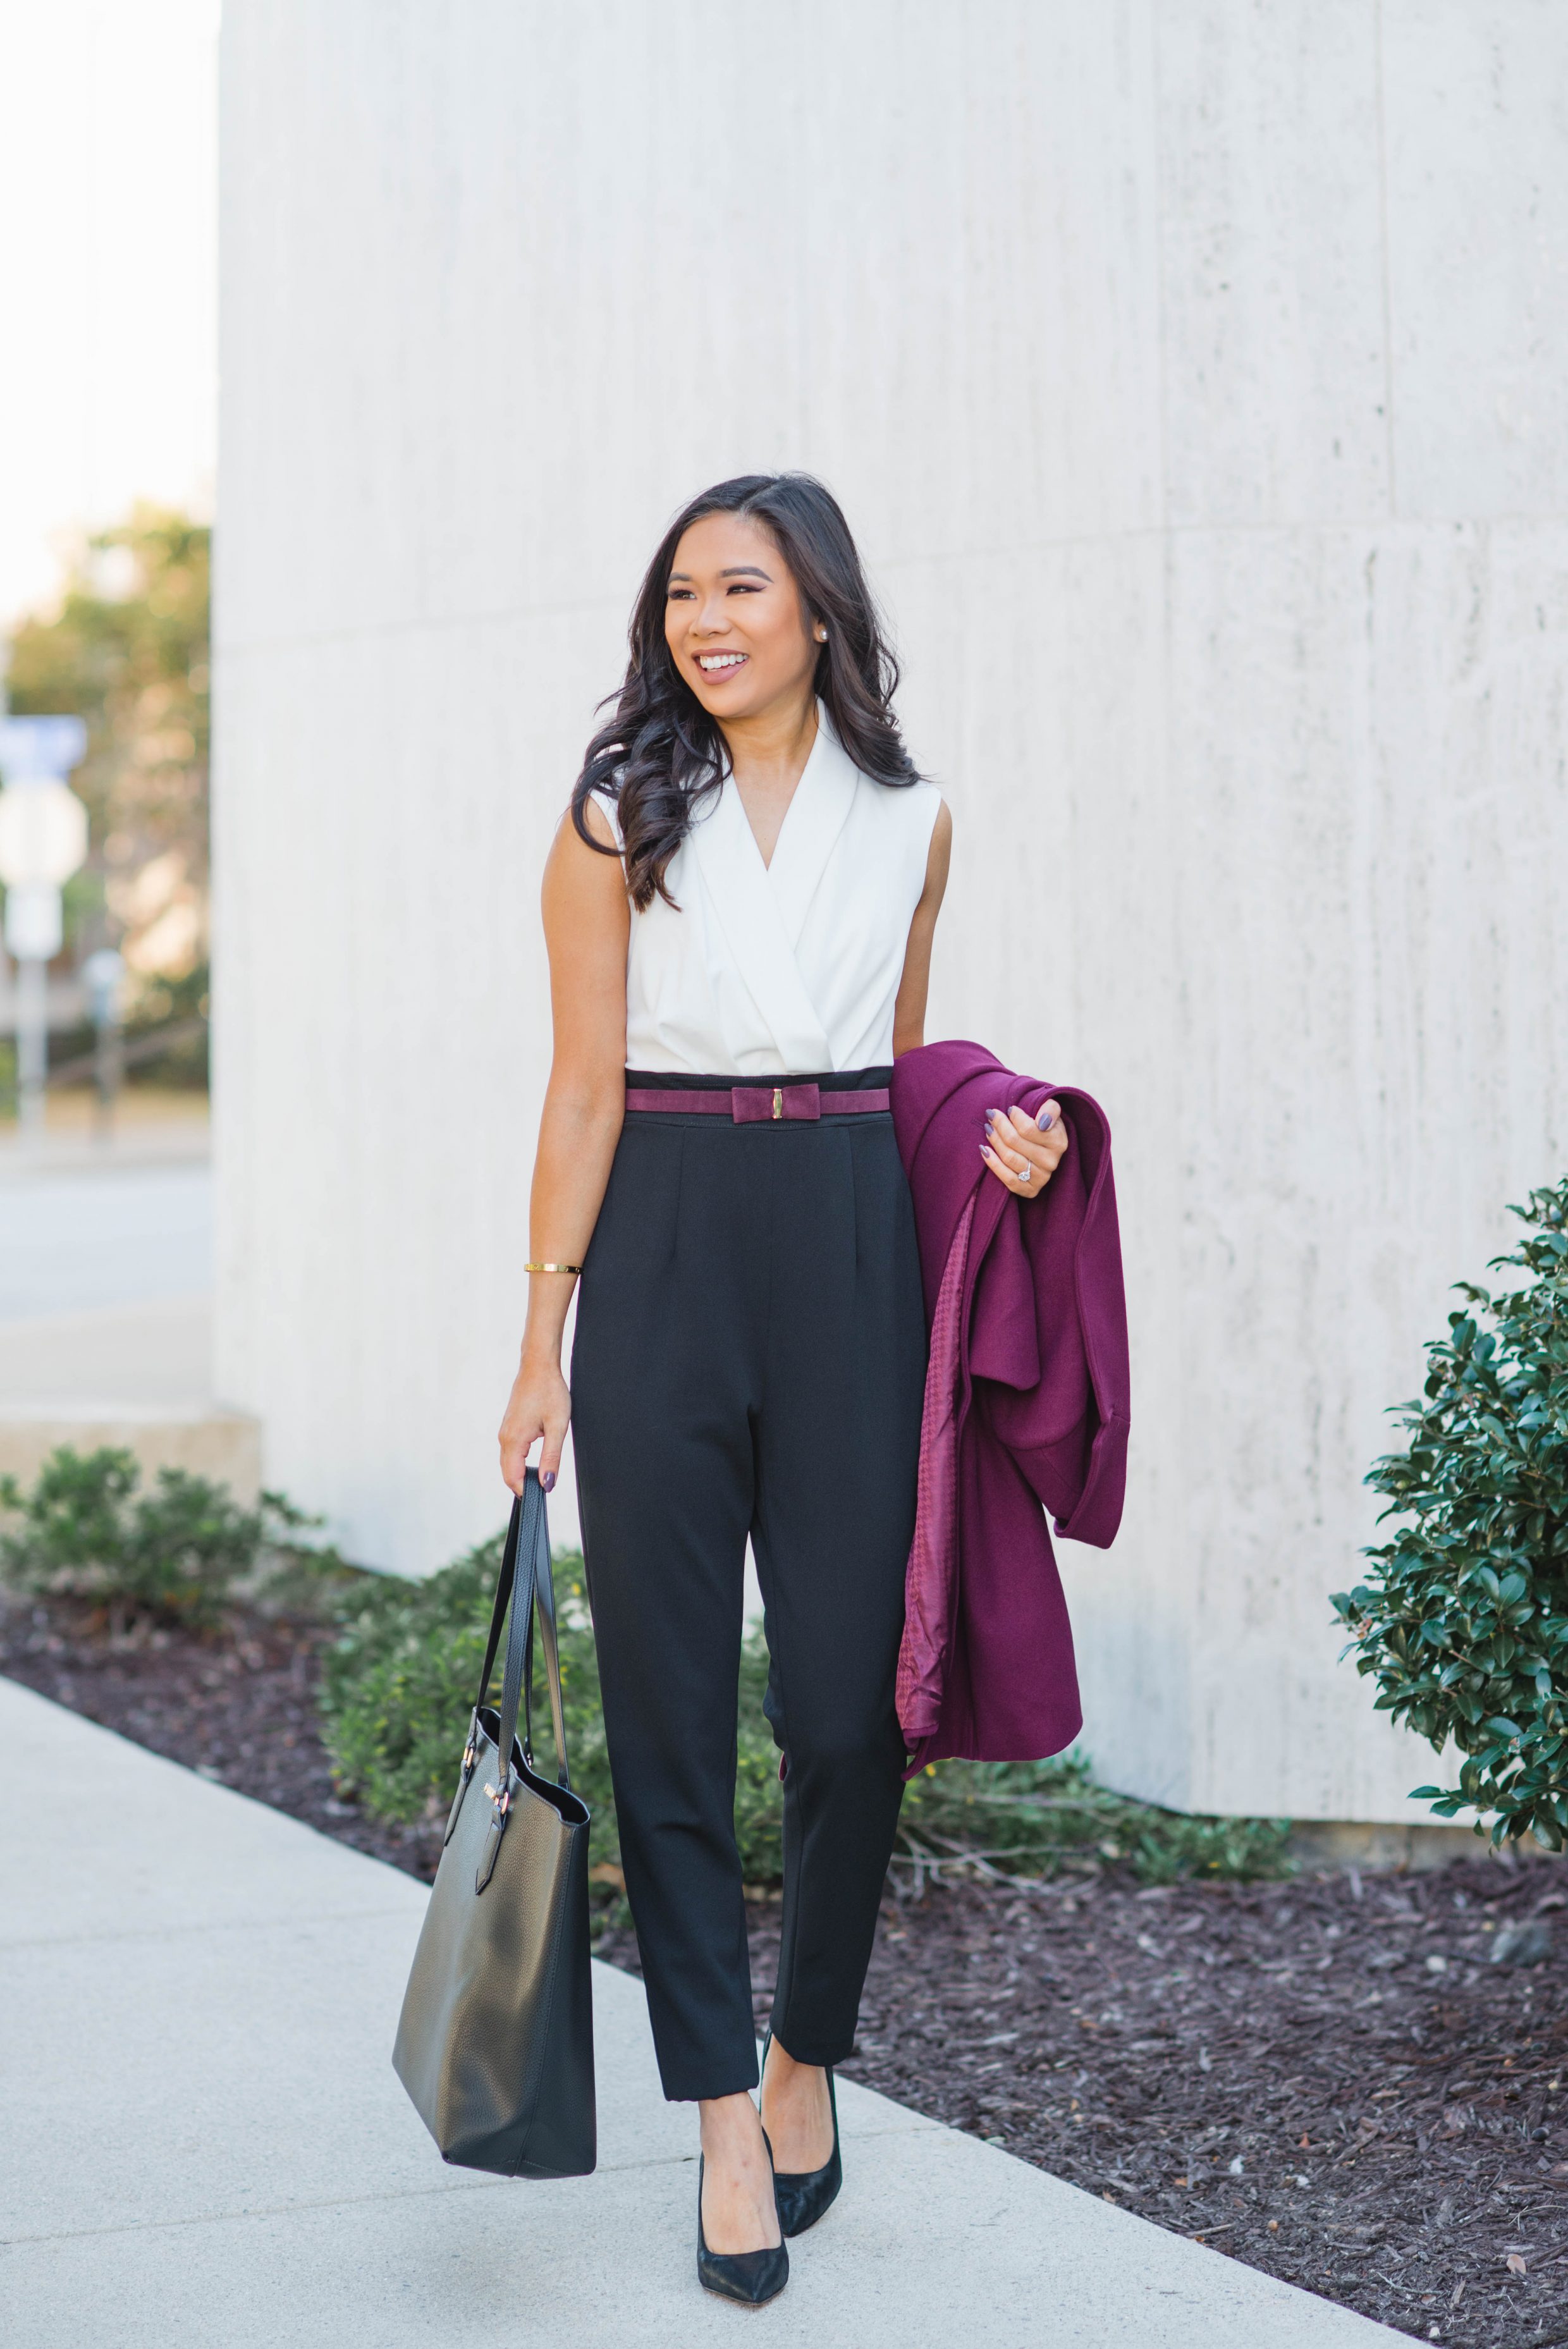 Hoang-Kim wears a contrast jumpsuit perfect for work and cocktail parties in the fall